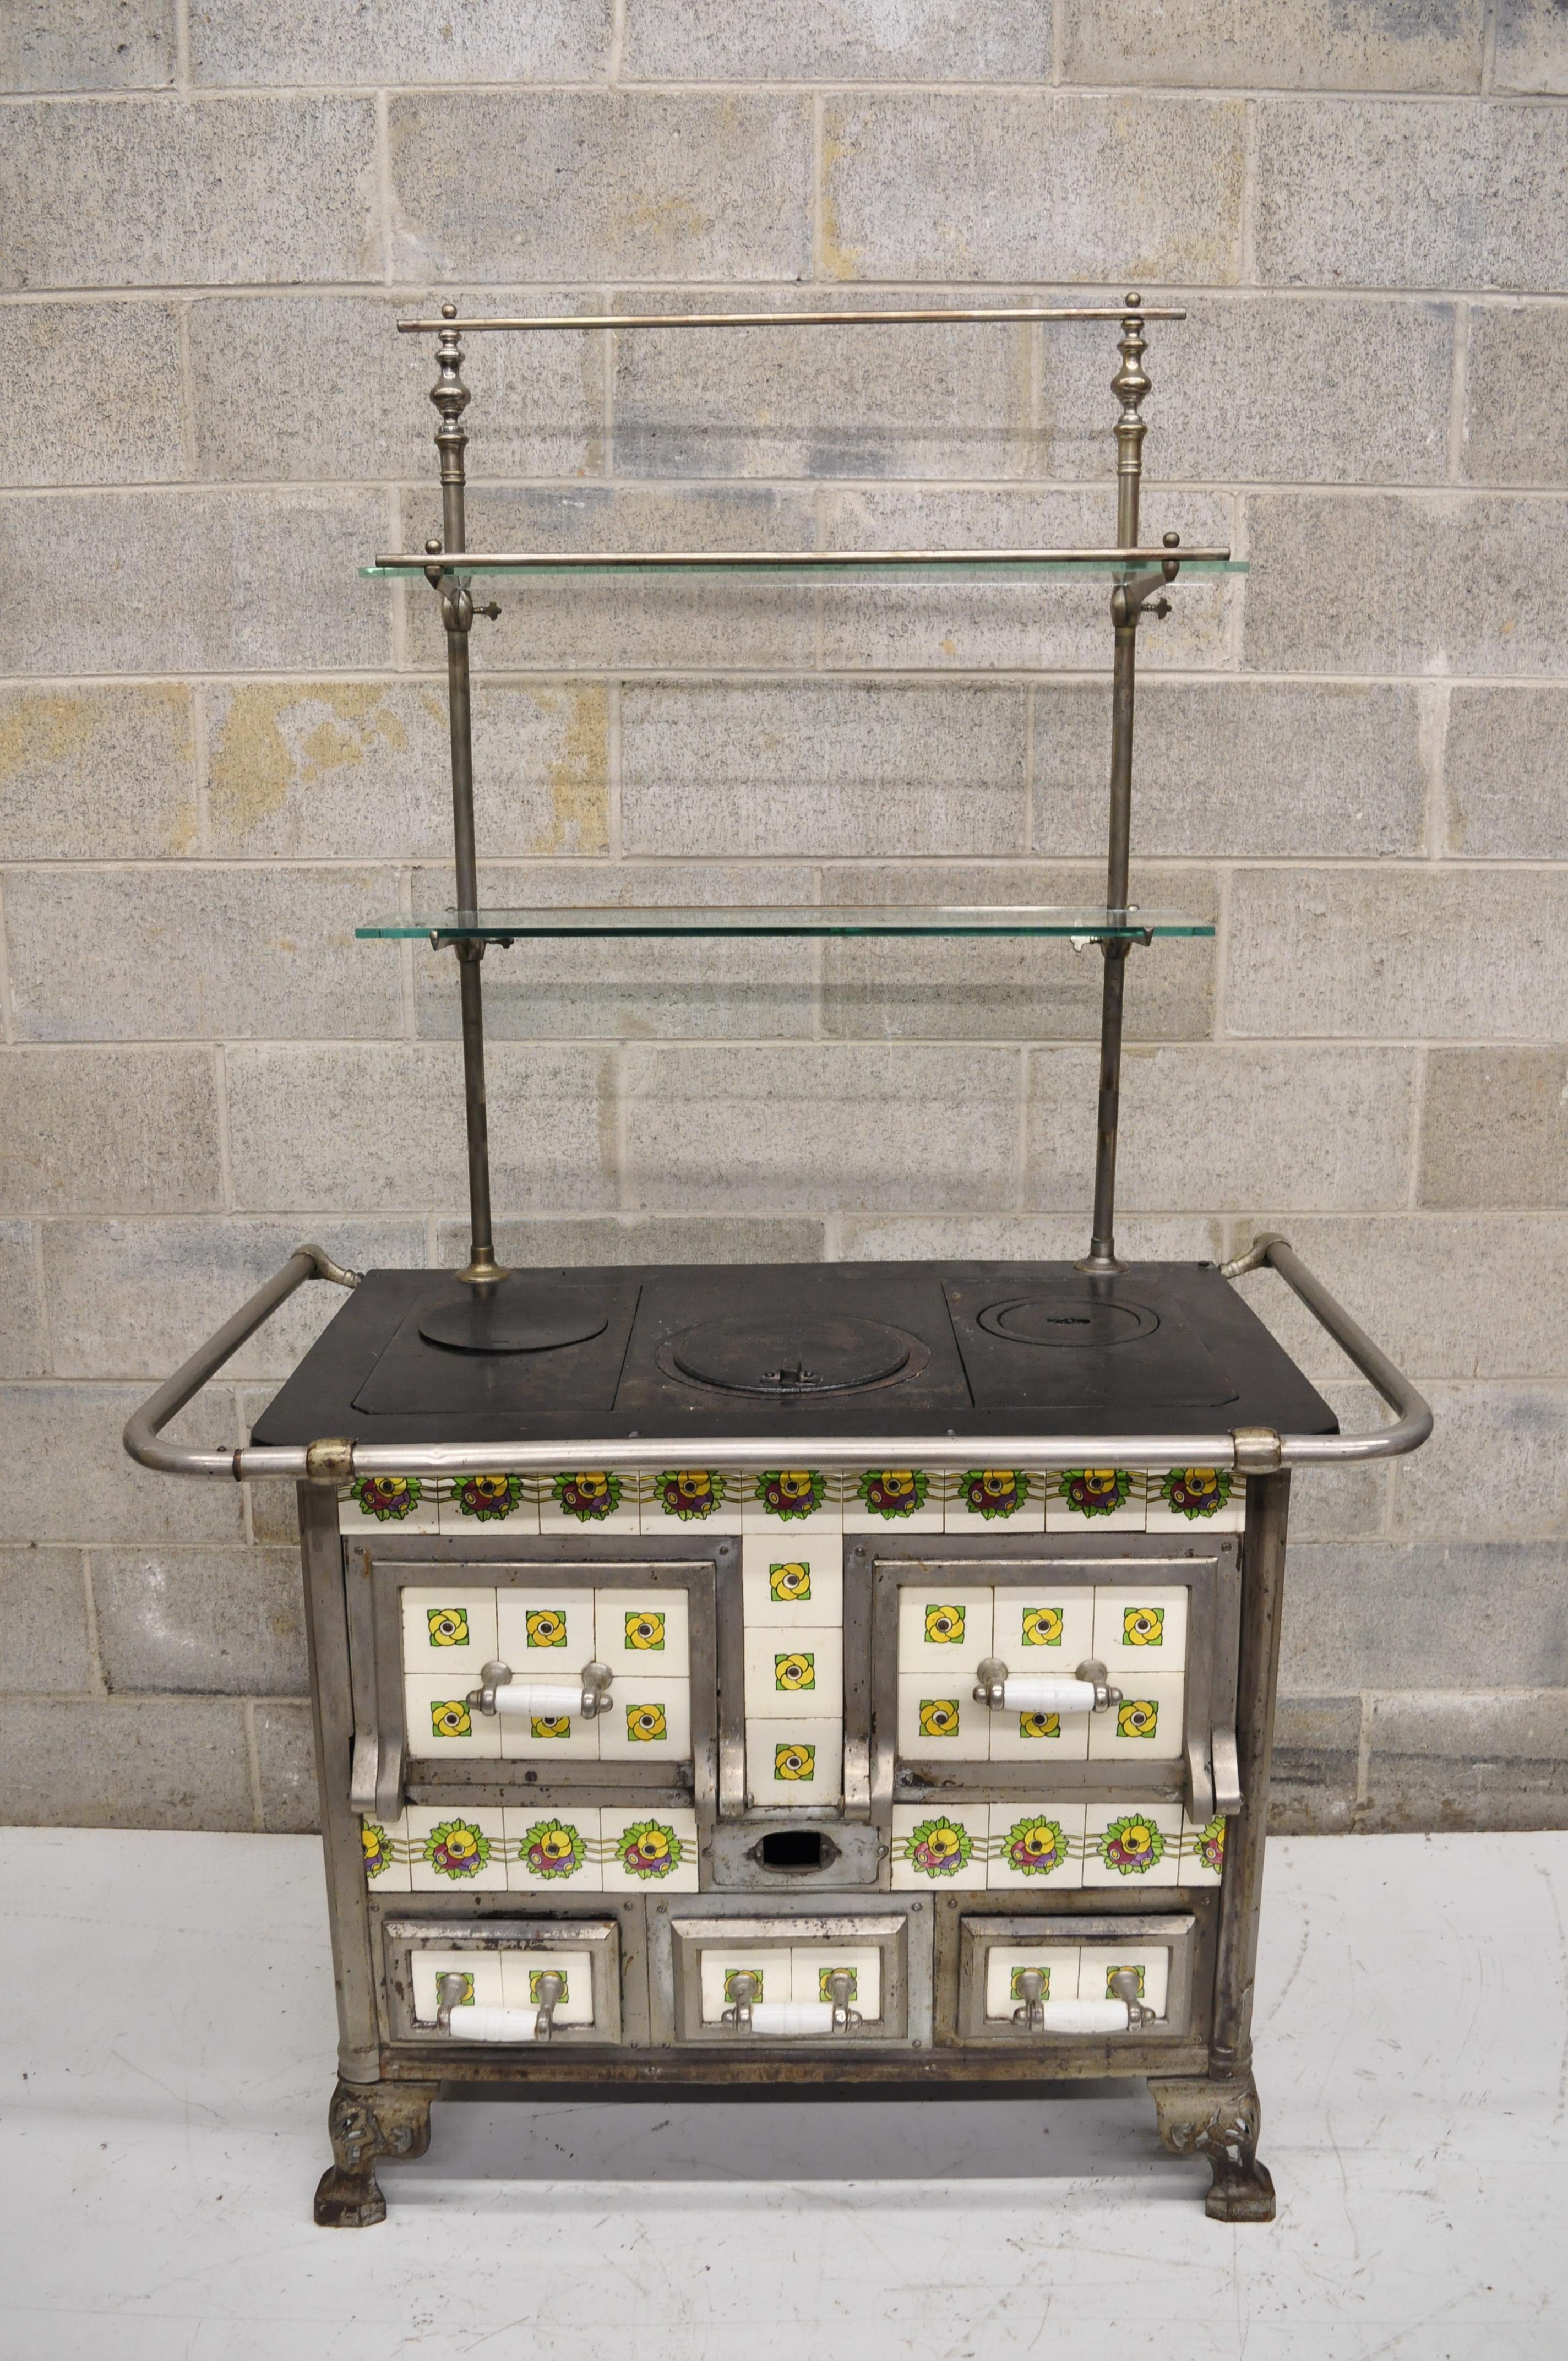 European (Probably Belgium or France) cast iron Art Nouveau glazed tile wood/coal burning stove with bakers rack shelf. Item features glazed stylized floral tiles, the rectangular frame with cast iron top concealing the interior to be filled with